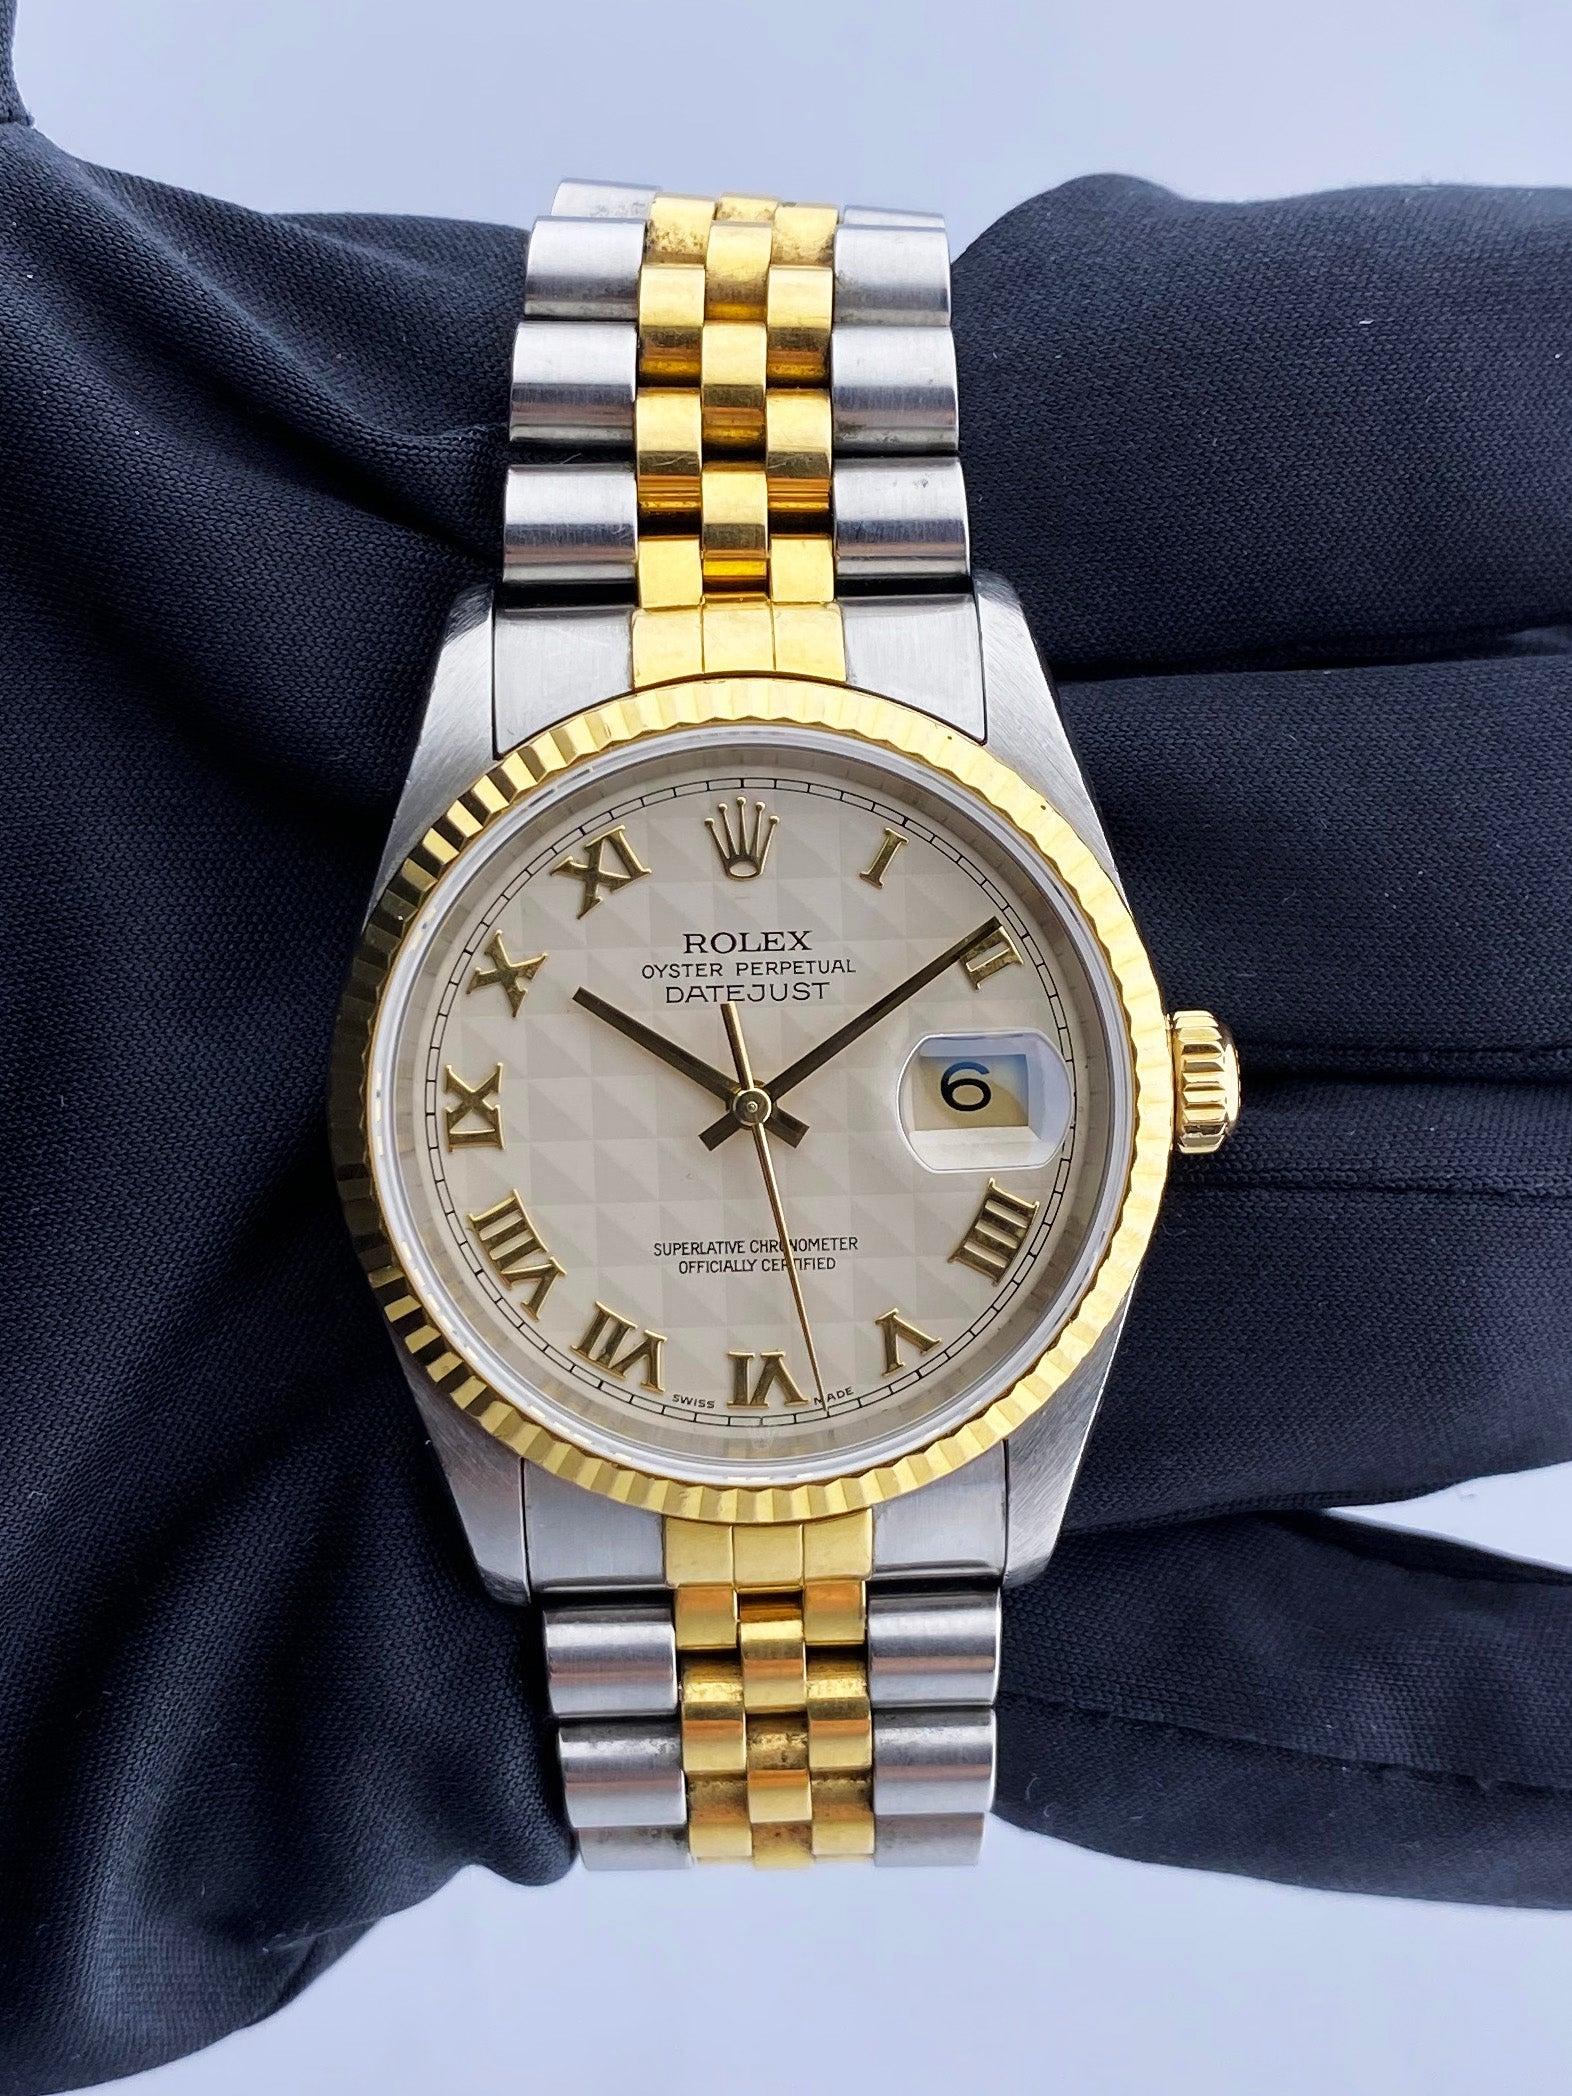 Rolex Oyster Perpetual Datejust 16233 Mens Watch. 36mm stainless steel case with  18K yellow gold fluted bezel. Ivory pyramid dial with gold hands and gold Roman numeral hour markers. Minute markers on the outer dial. Date display at the 3 o'clock